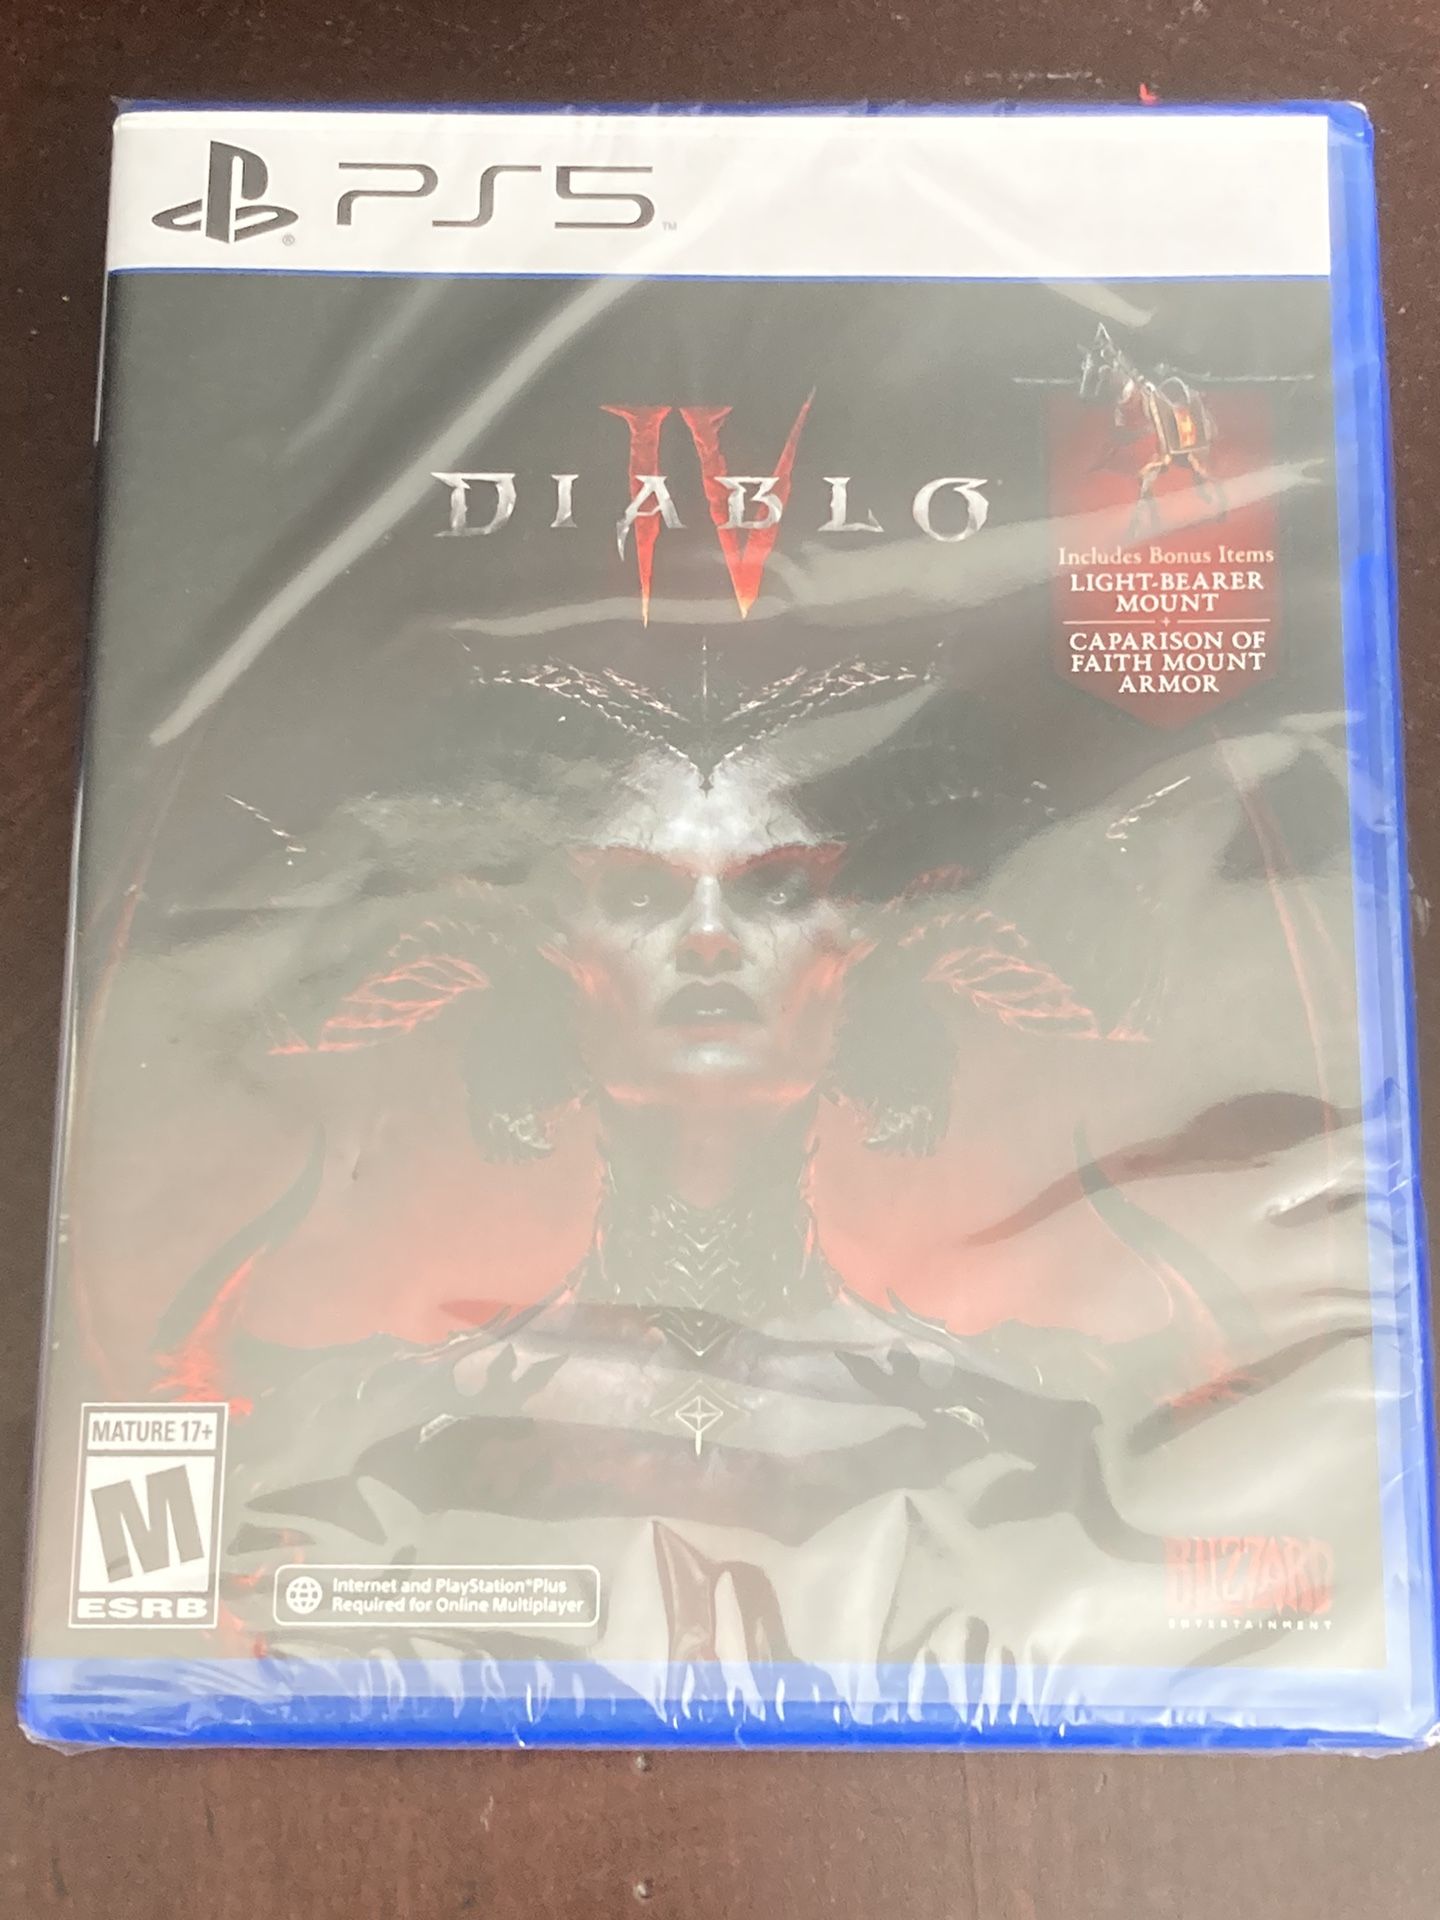 Diablo IV 4 Ps5 Action RPG Game Blizzard Online Couch Co Op 2 Player Adventure S